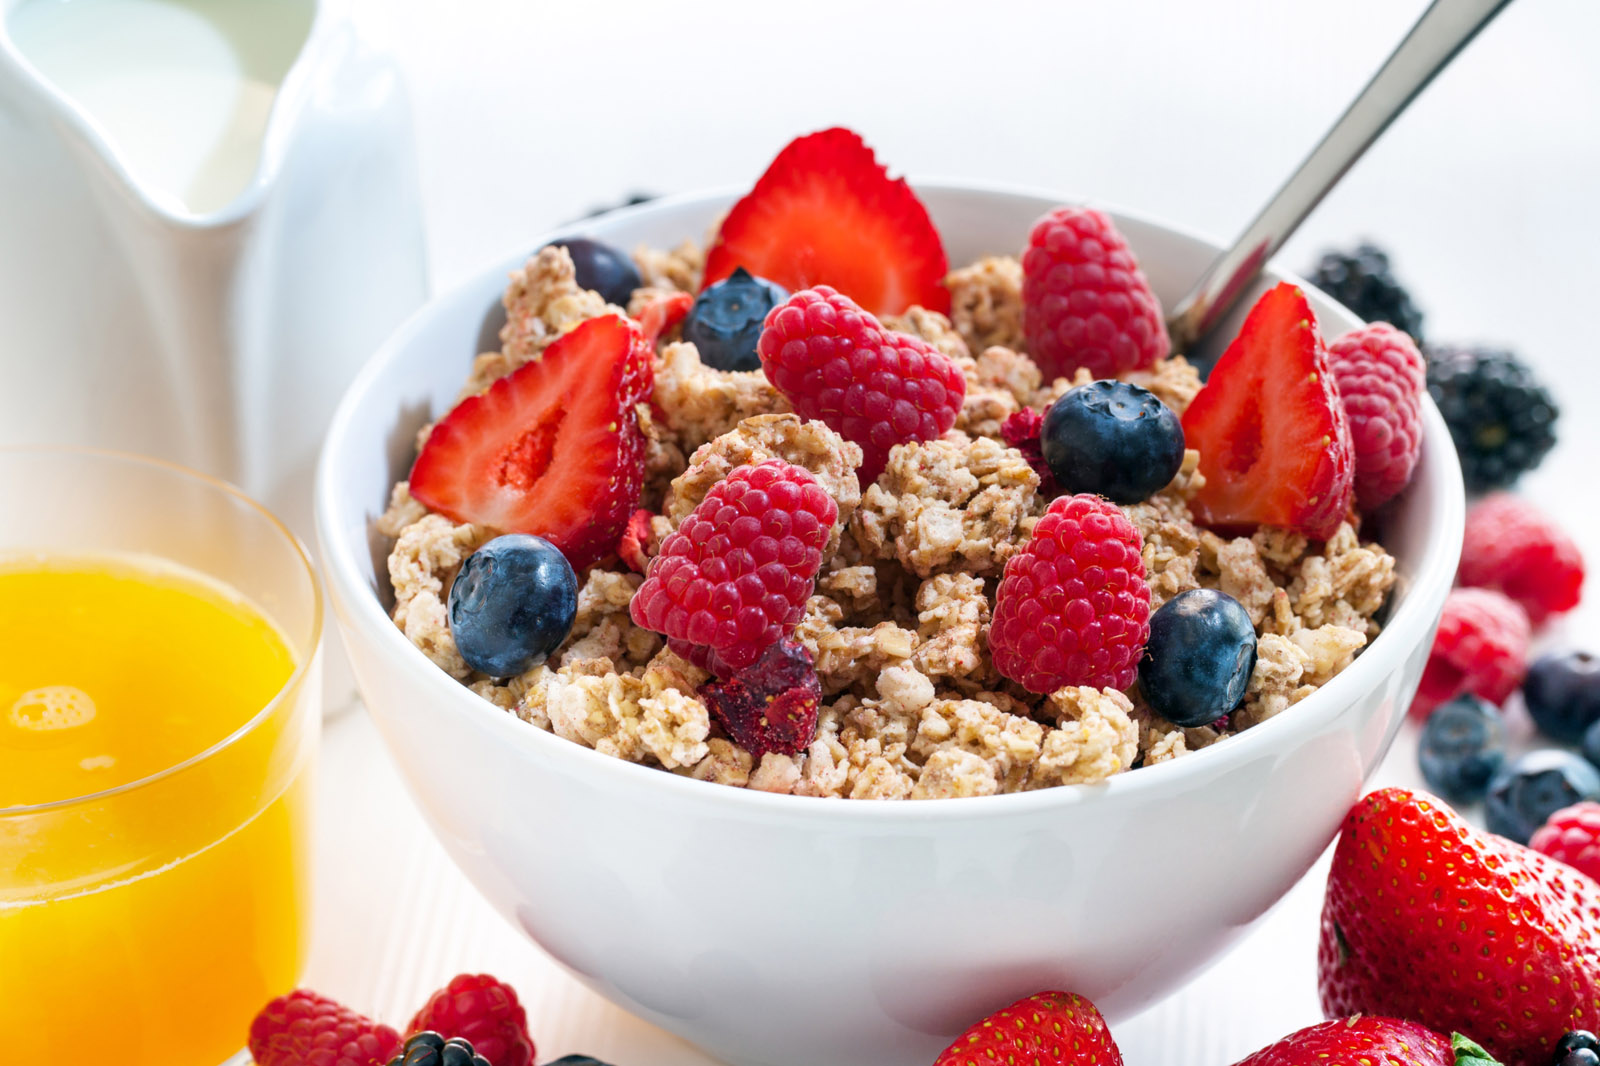 Skipping breakfast is one of the factors in childhood weight gain, a new study finds. (Thinkstock)